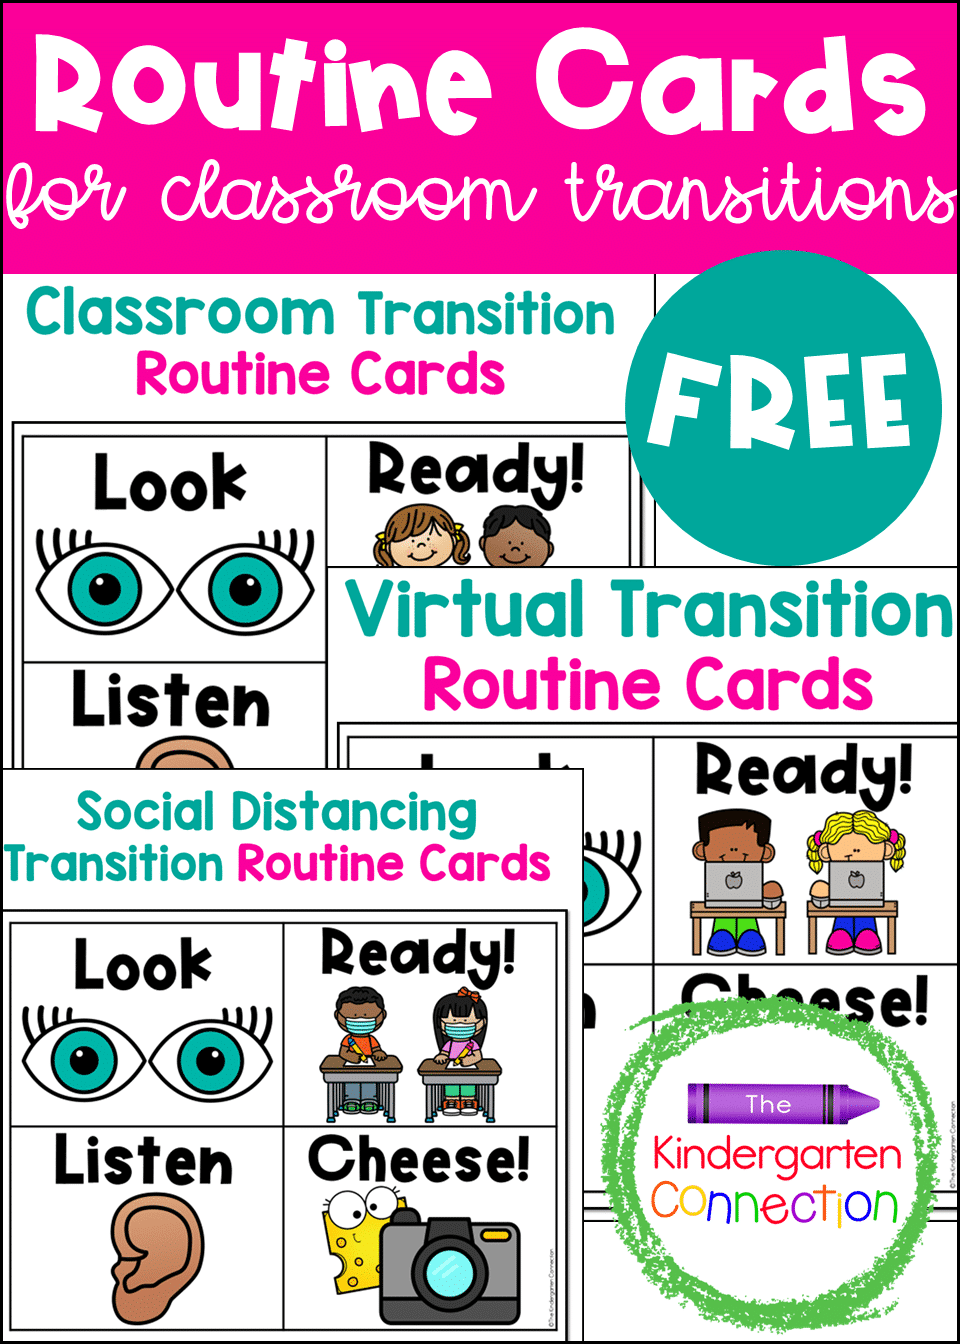 These free routine cards for classroom transitions are a great tool no matter if you are teaching virtually, in-person with social distancing, or face-to-face.